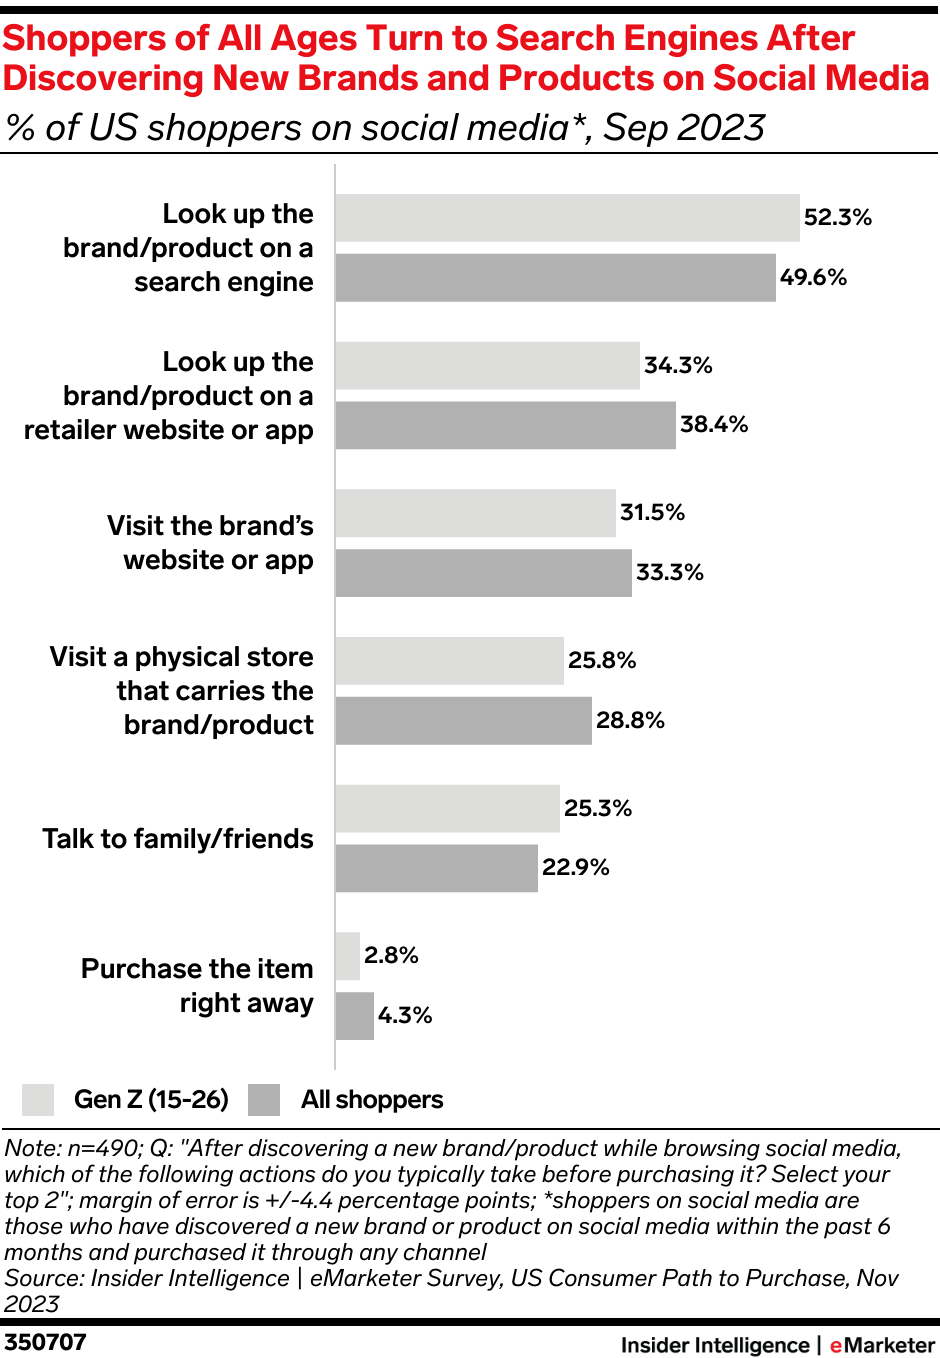 Shoppers of All Ages Turn to Search Engines After Discovering New Brands and Products on Social Media